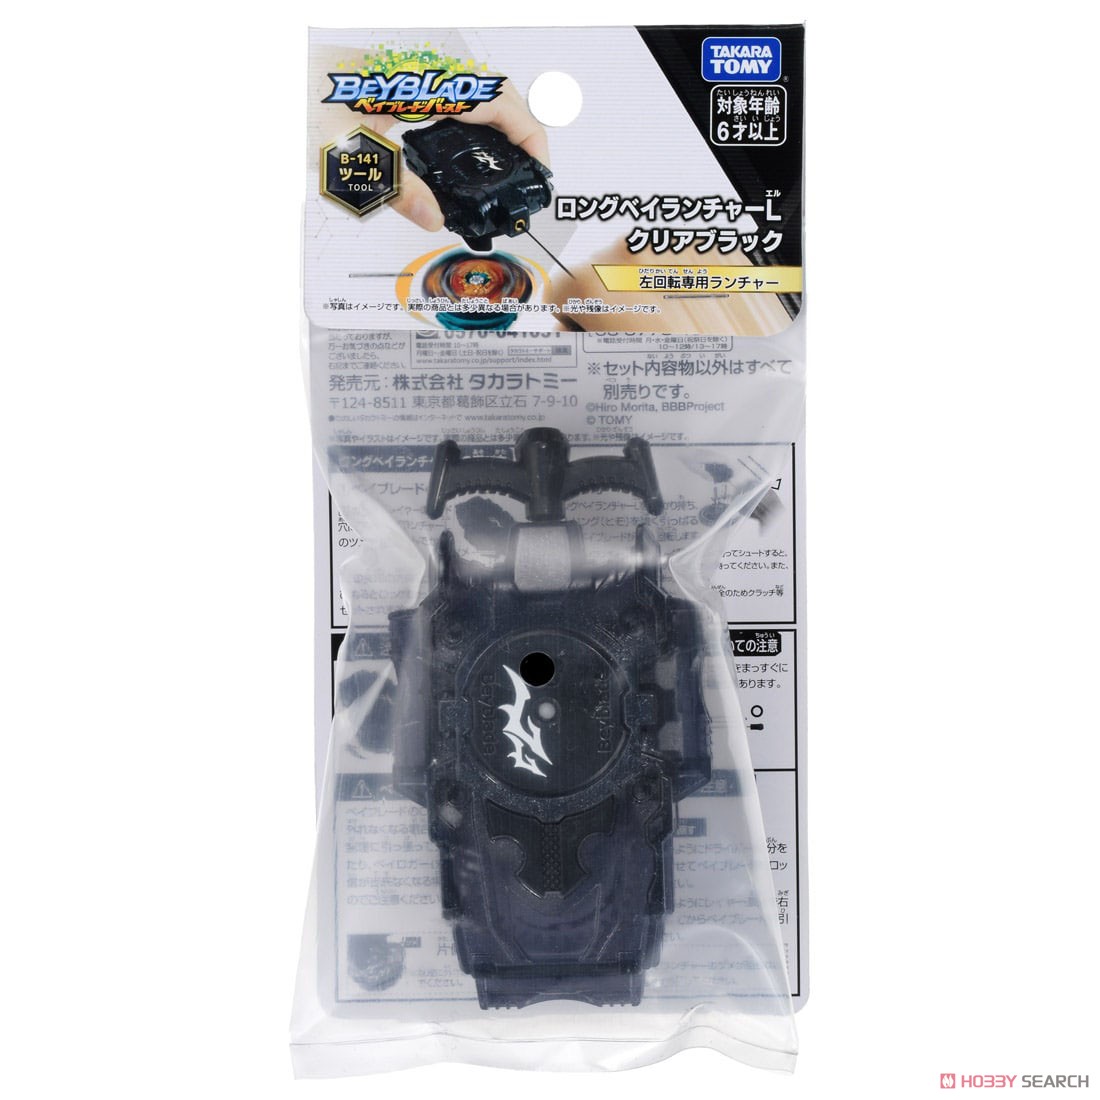 Beyblade Burst B-141 Long Bey Launcher L Clear Black (Active Toy) Package1